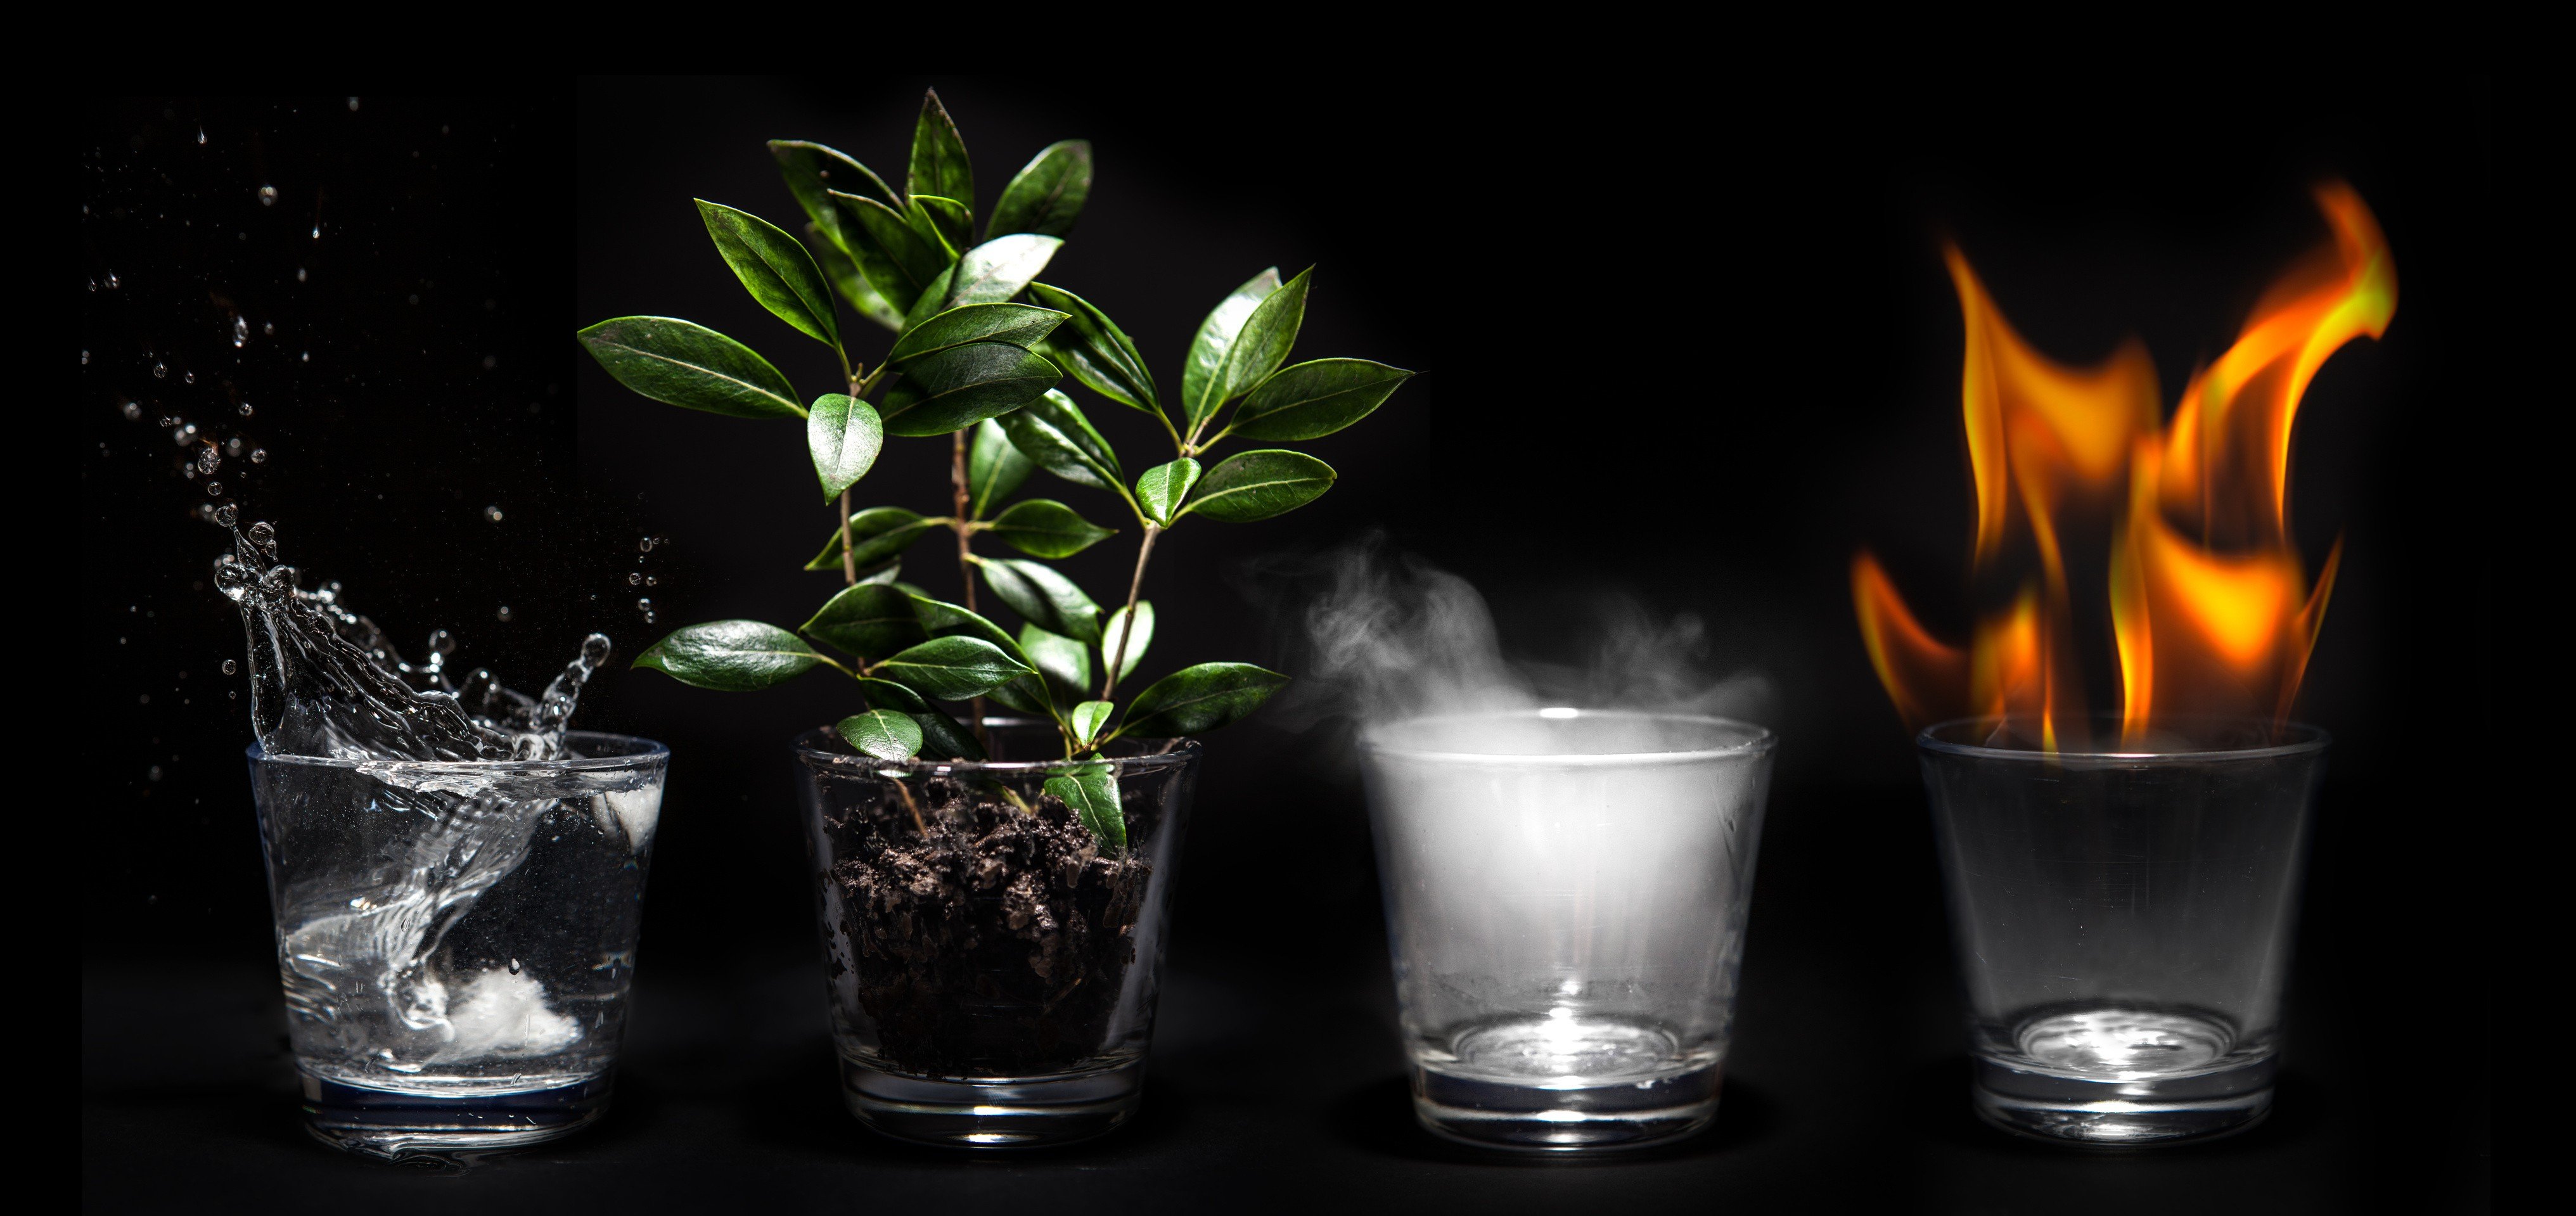 fire, Water, Air, Earth, Four elements Wallpaper